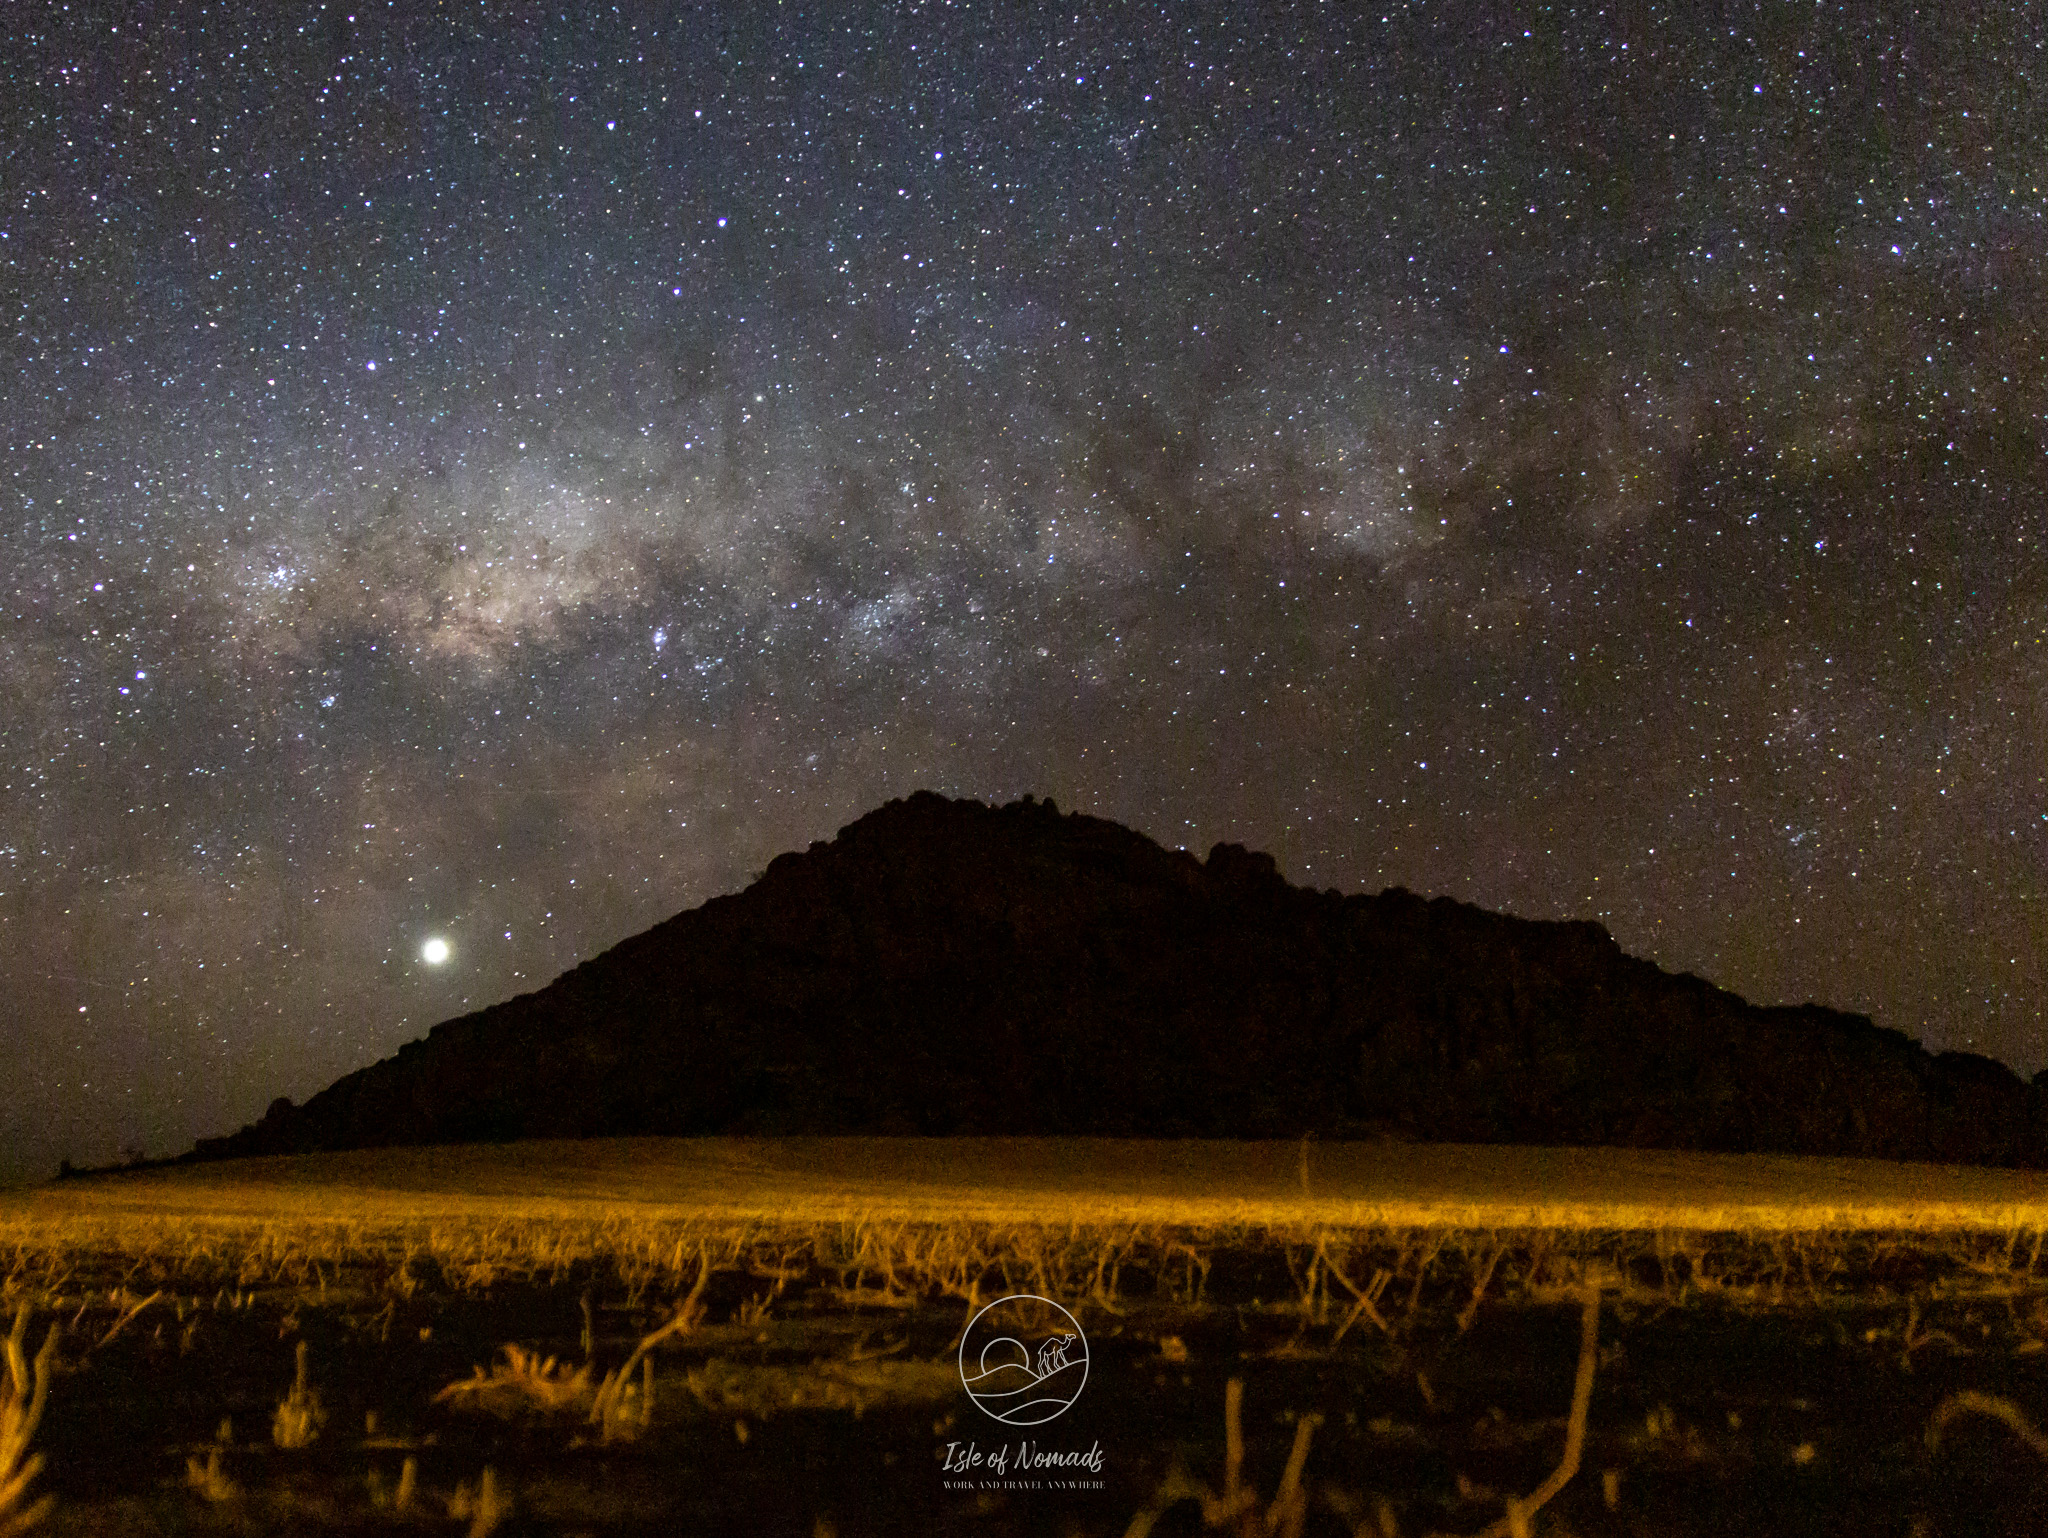 Make sure to go stargazing when in Sossusvlei - this picture was taken just outside of our accommodation